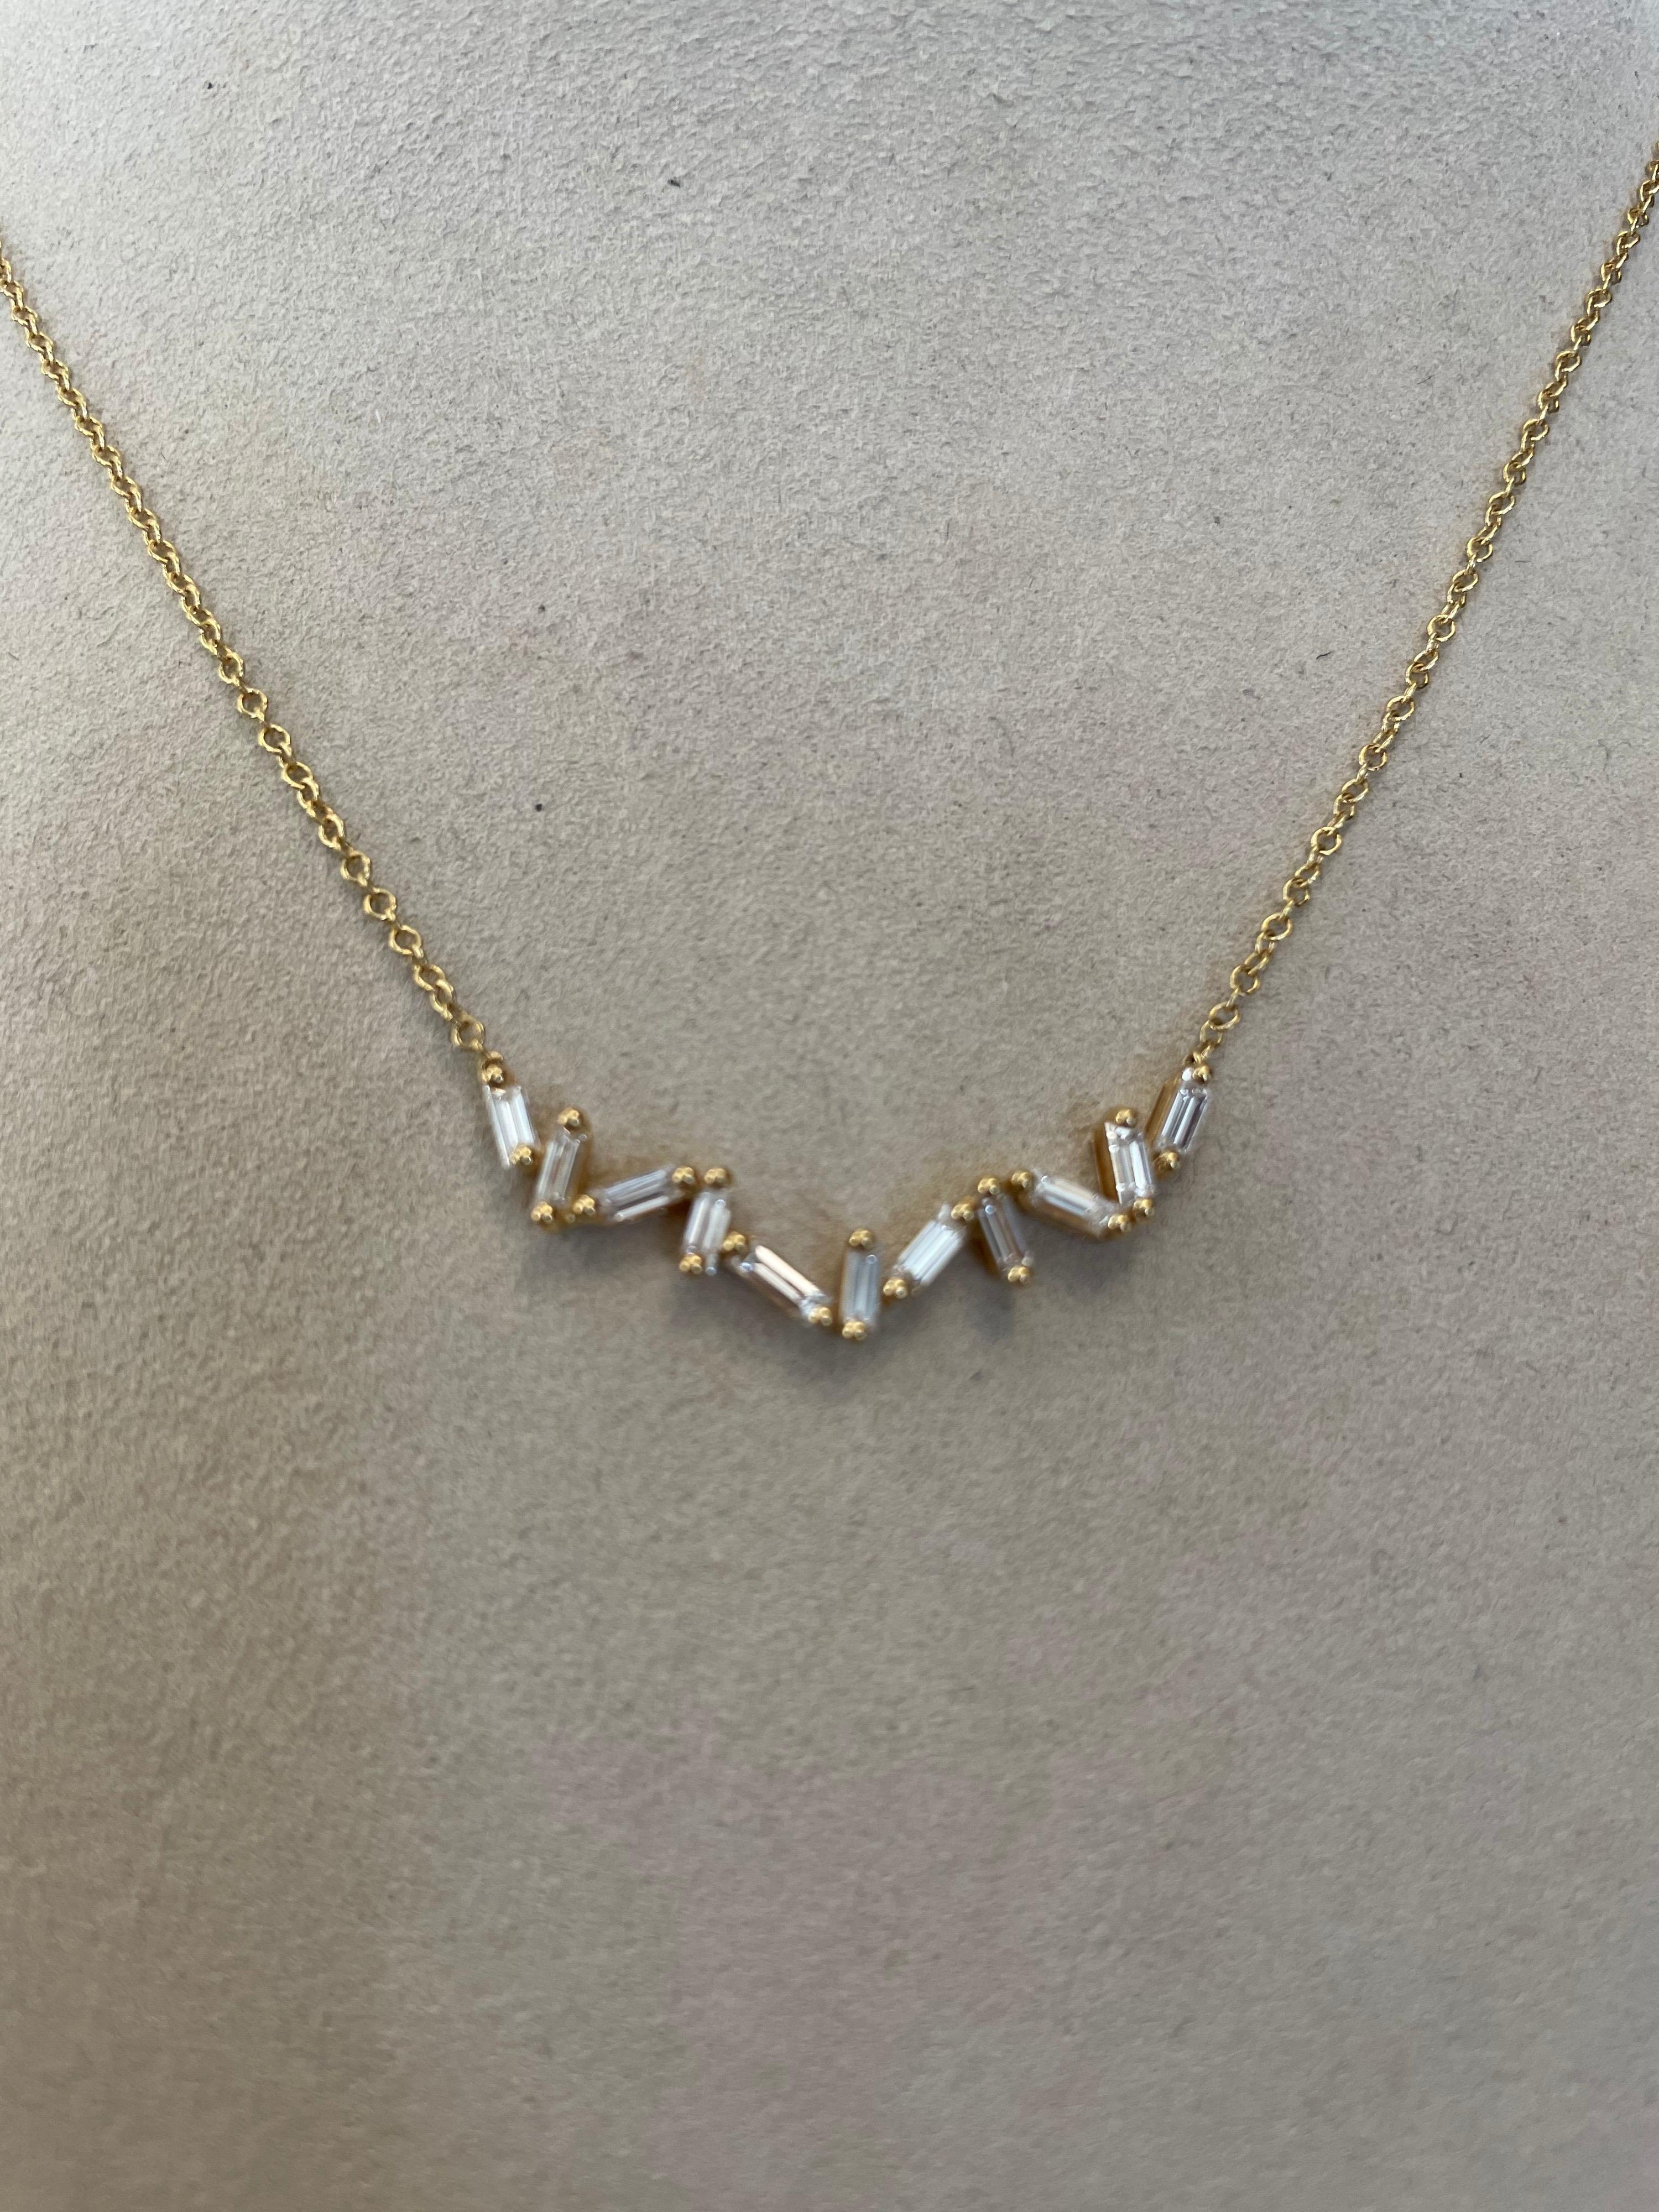 18K Yellow gold necklace prong set with 11 straight baguette diamonds weighing .64cts total, in an abstract orientation, 16.5 inches long.
last retail $2000